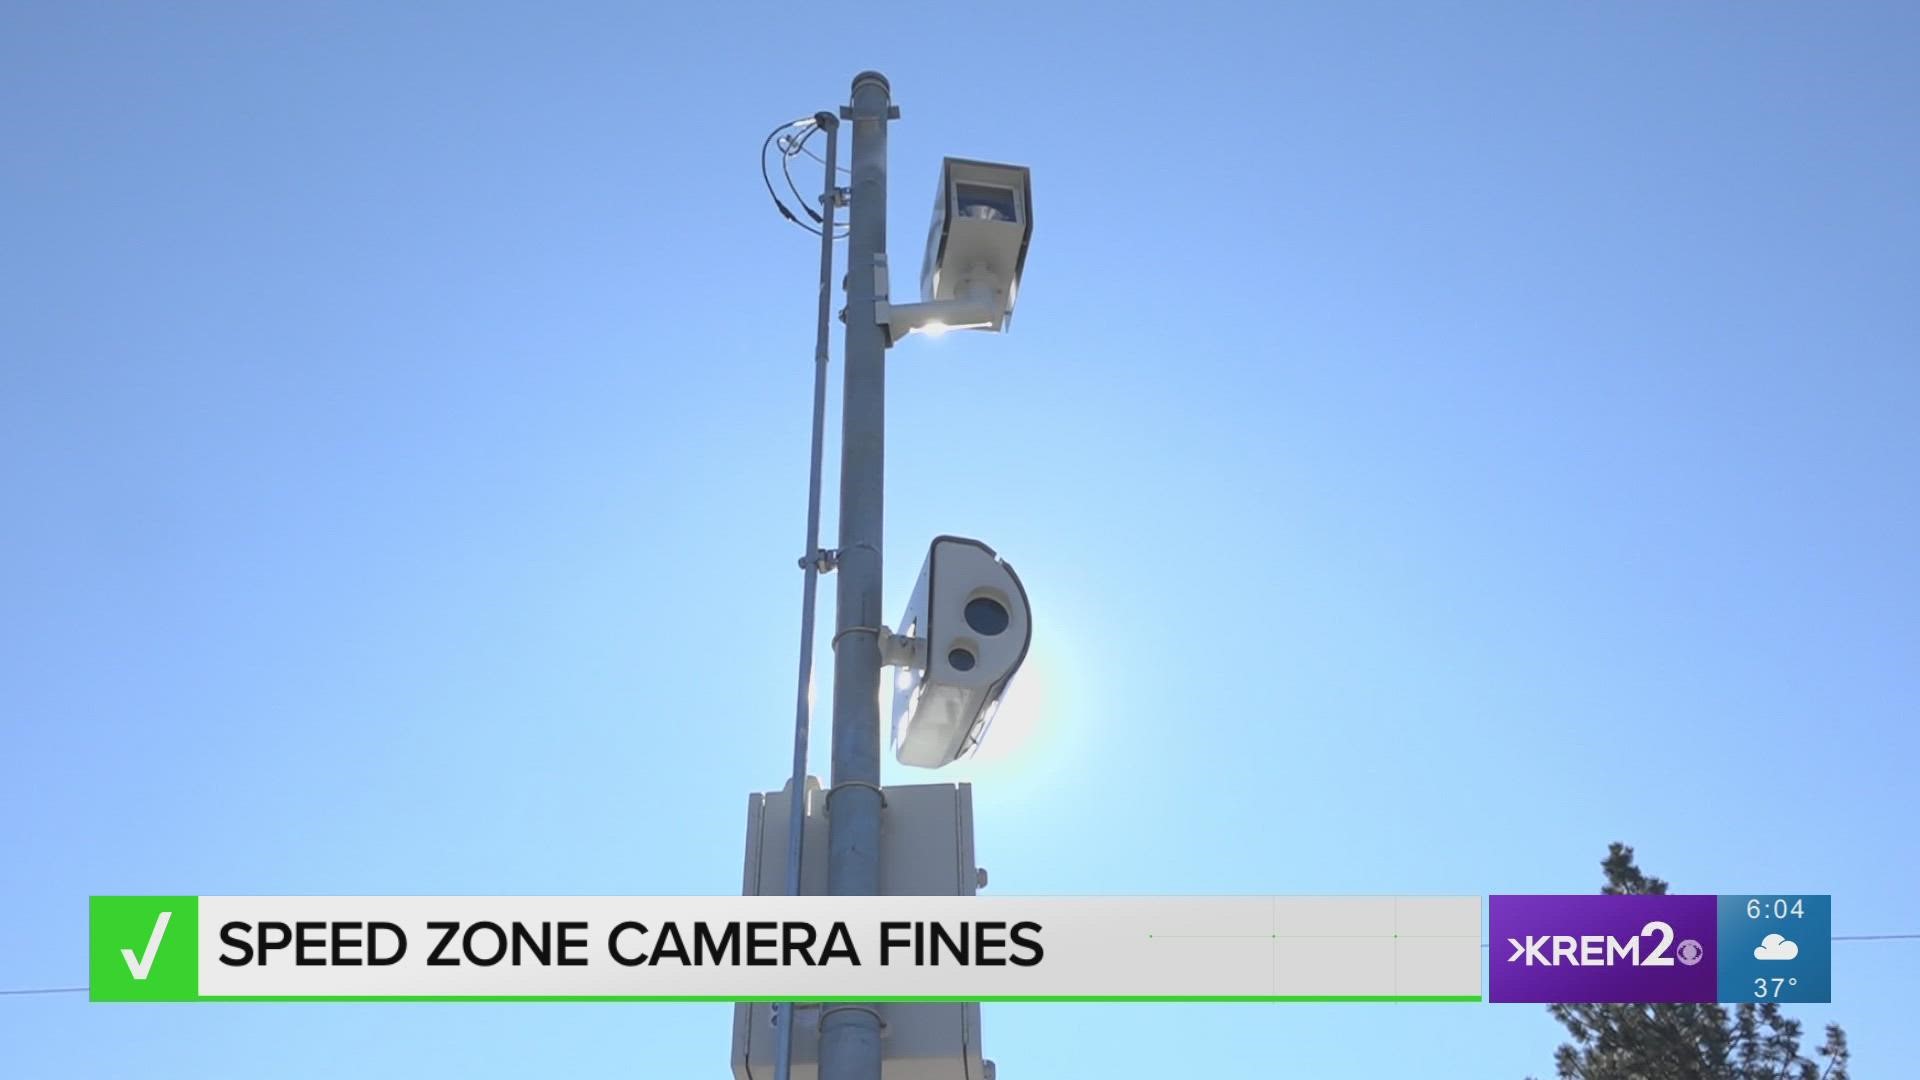 While the city of Spokane makes money from speed zone cameras it doesn't own the equipment of process the tickets. We Verify why you still need to pay any fines.